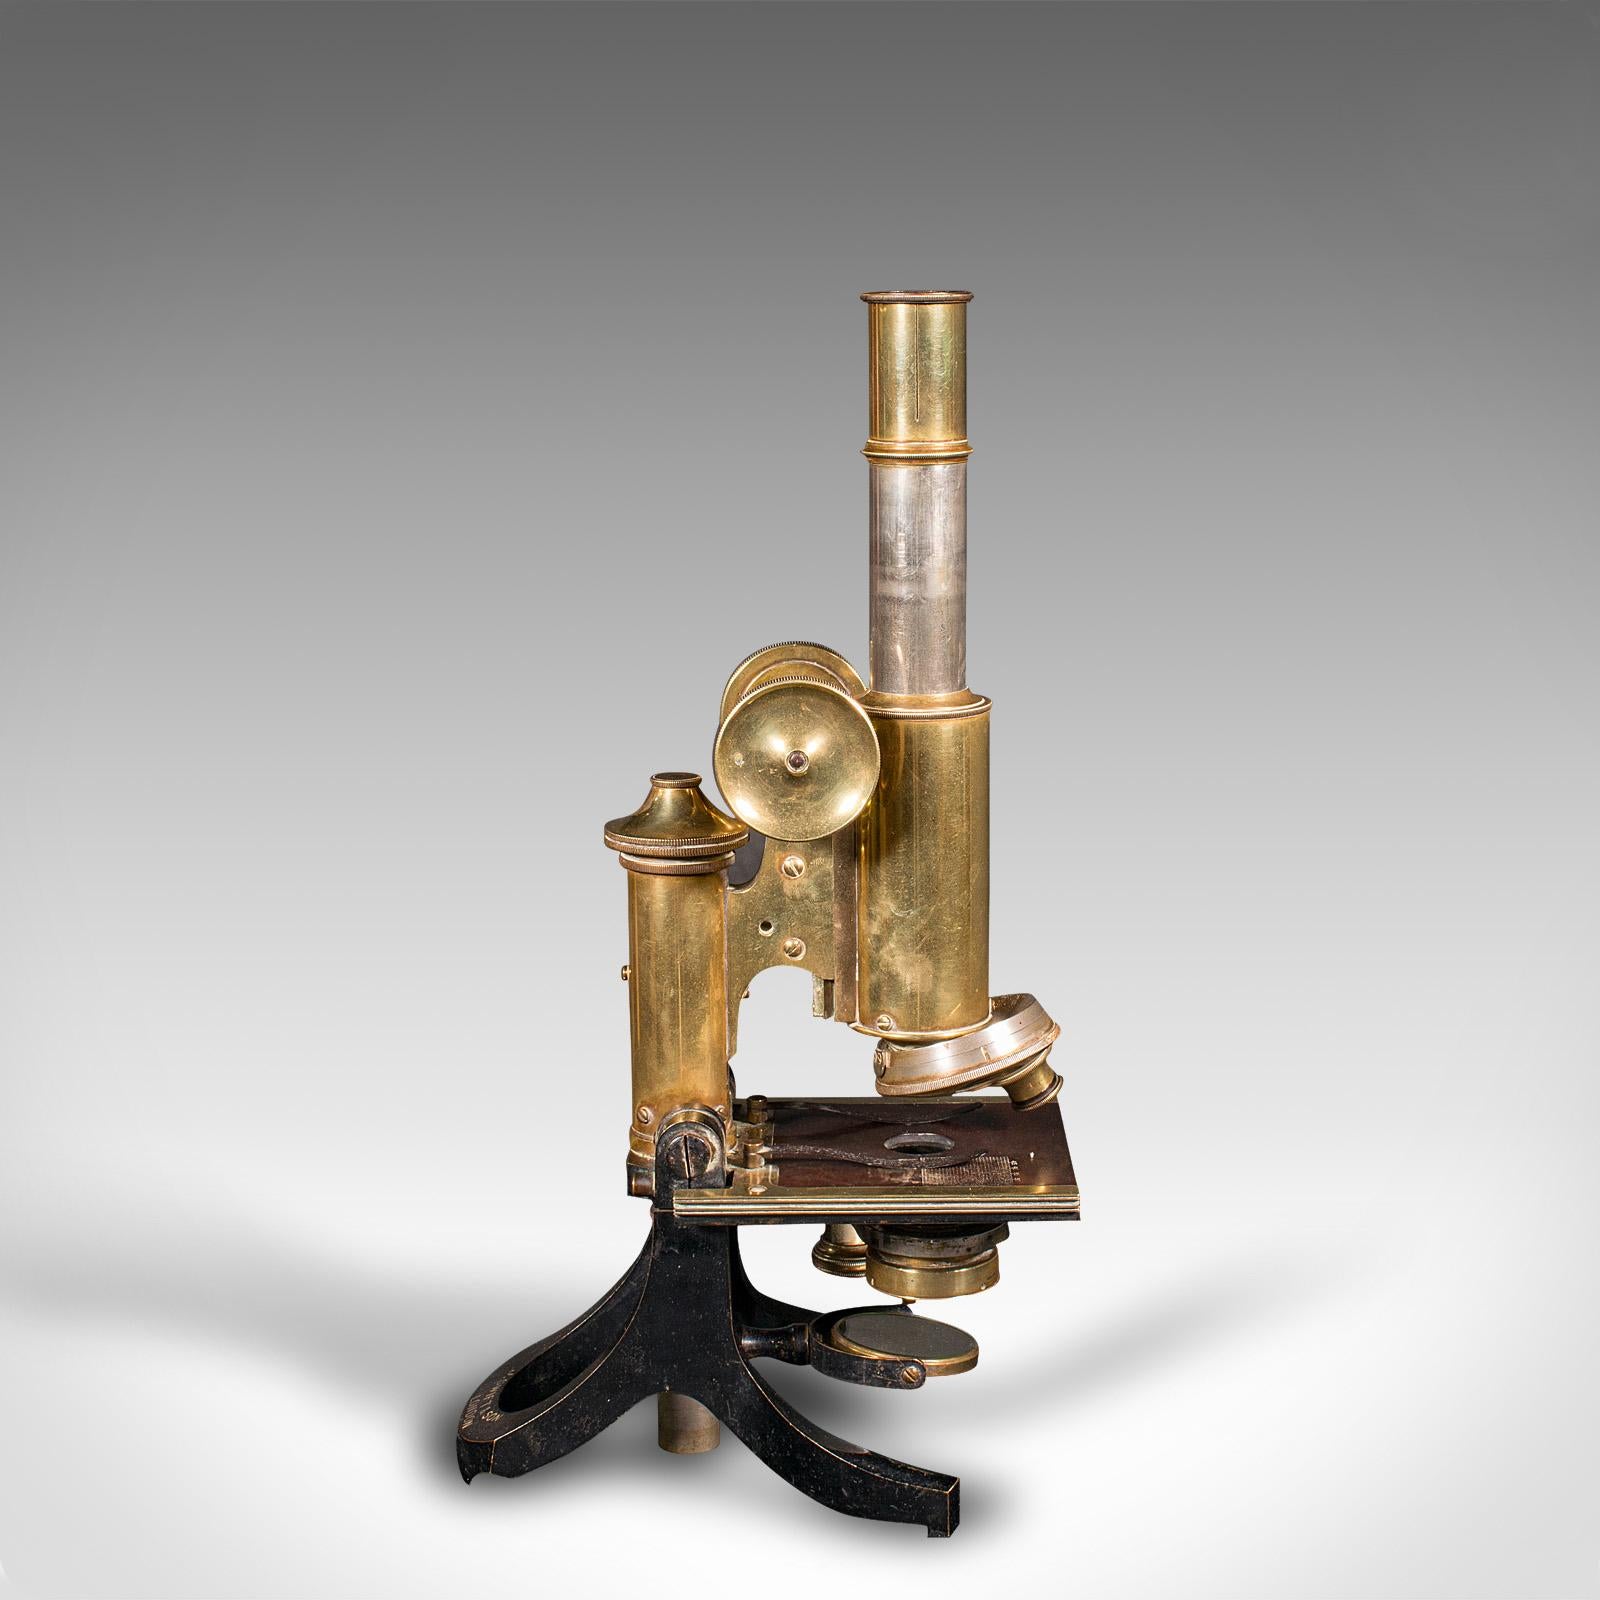 who invented first microscope